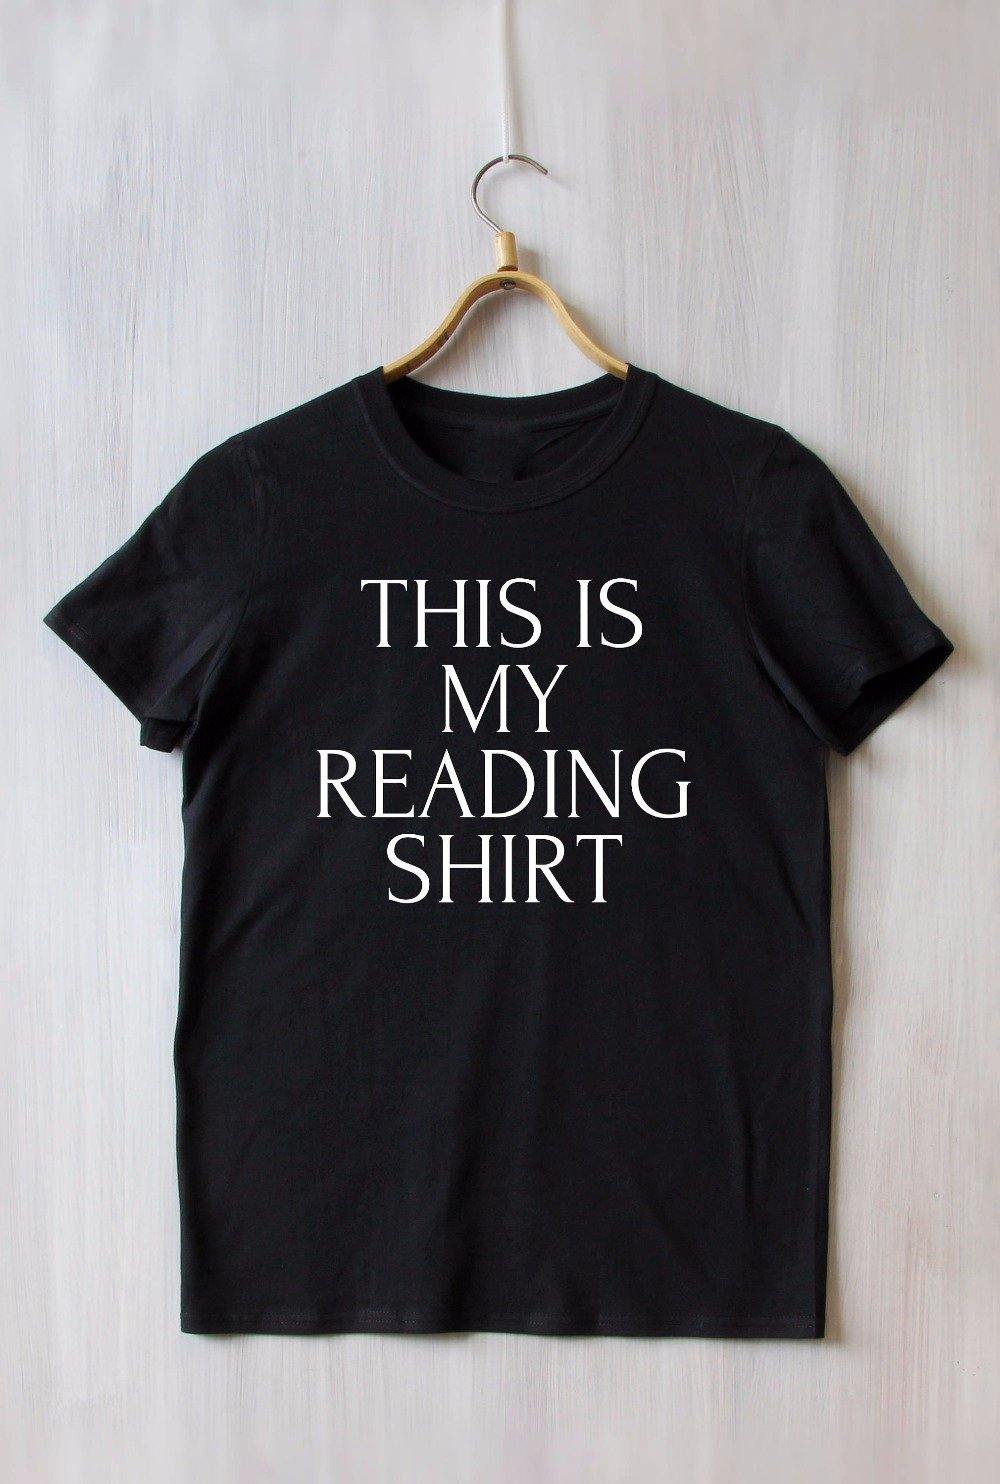 This Is My Reading Shirt Tee Tshirt Perfect Gift for Bookworm Book Lover Booknerd Unisex - Belfast Books